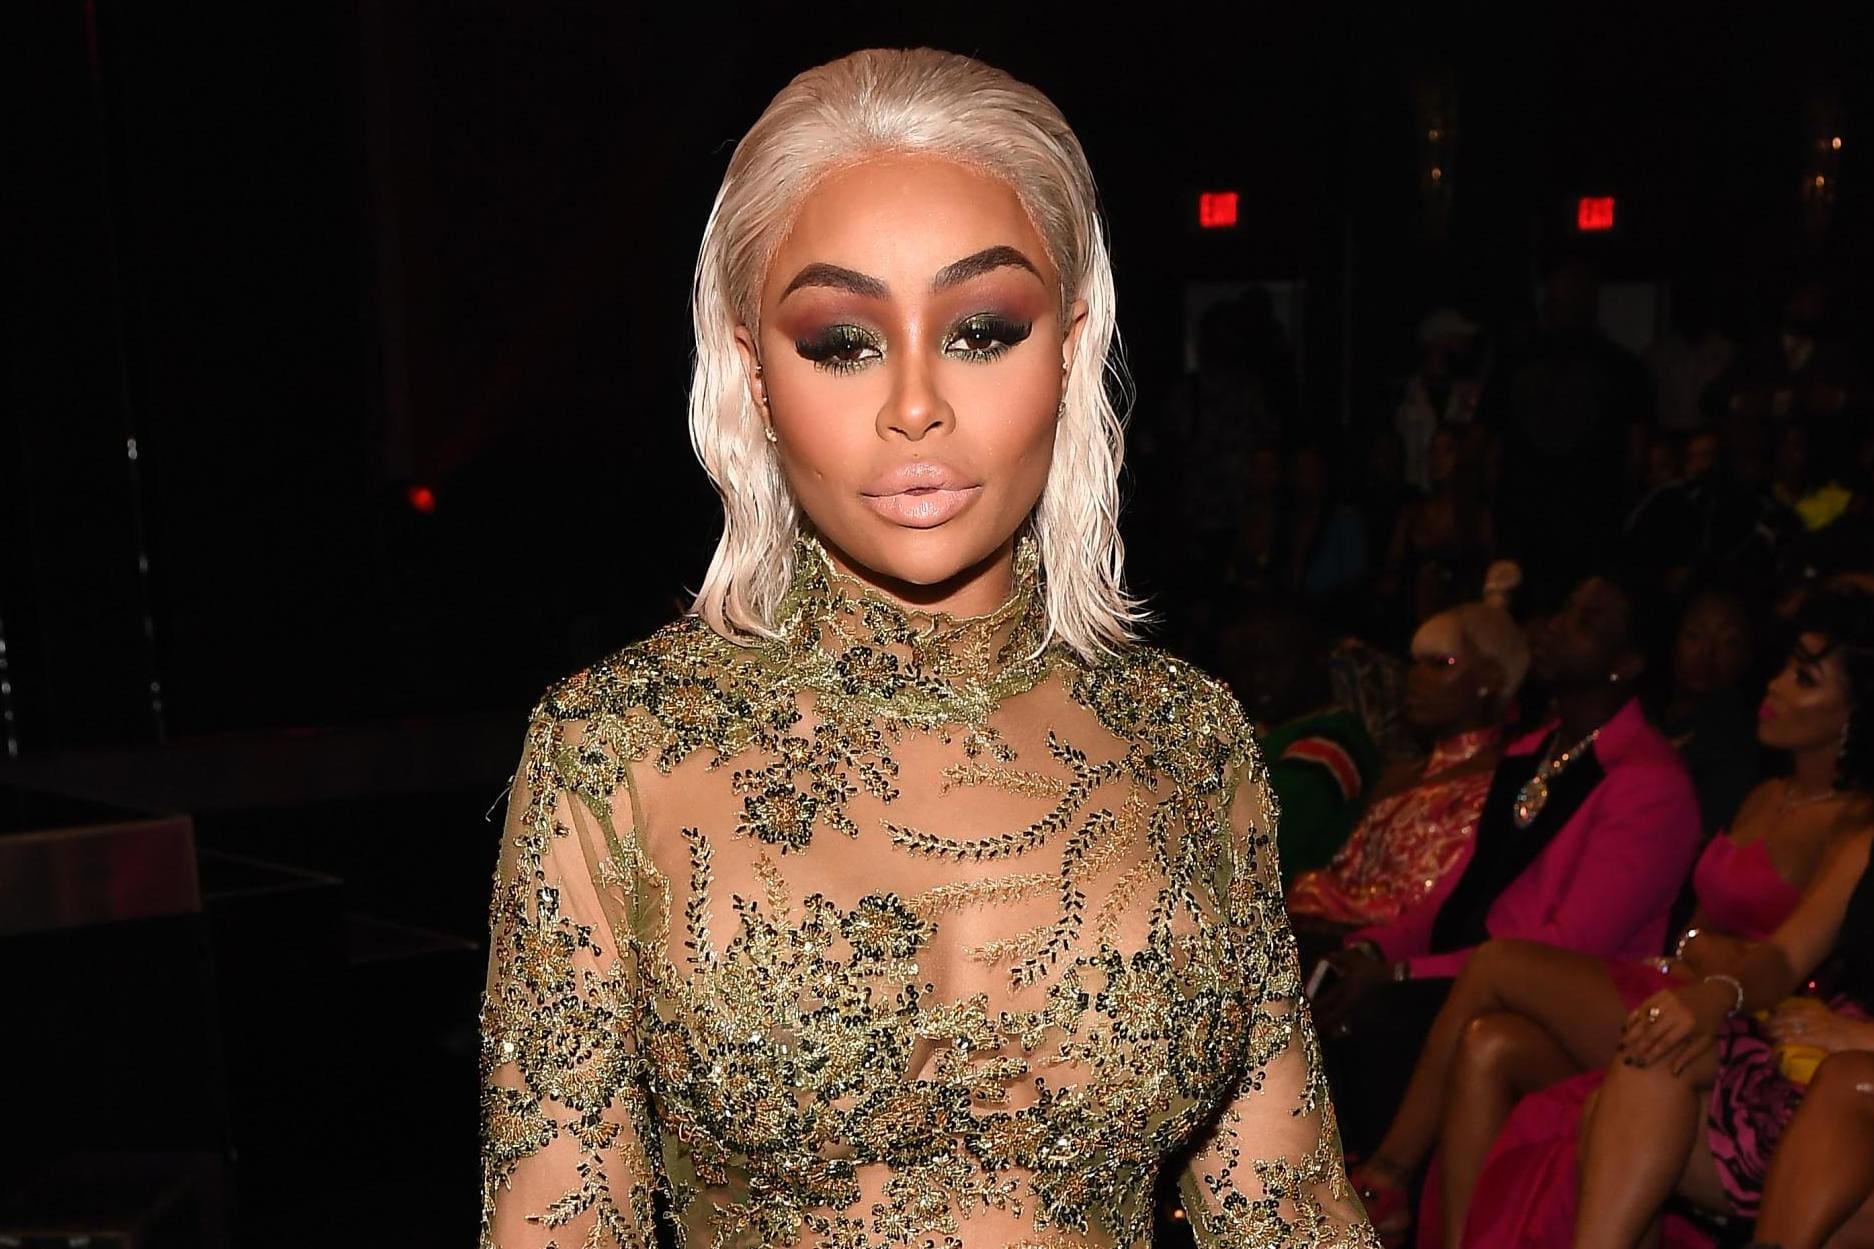 Blac Chyna Is Meeting Her Fans At The Grad Con LA 2019 Starting Today